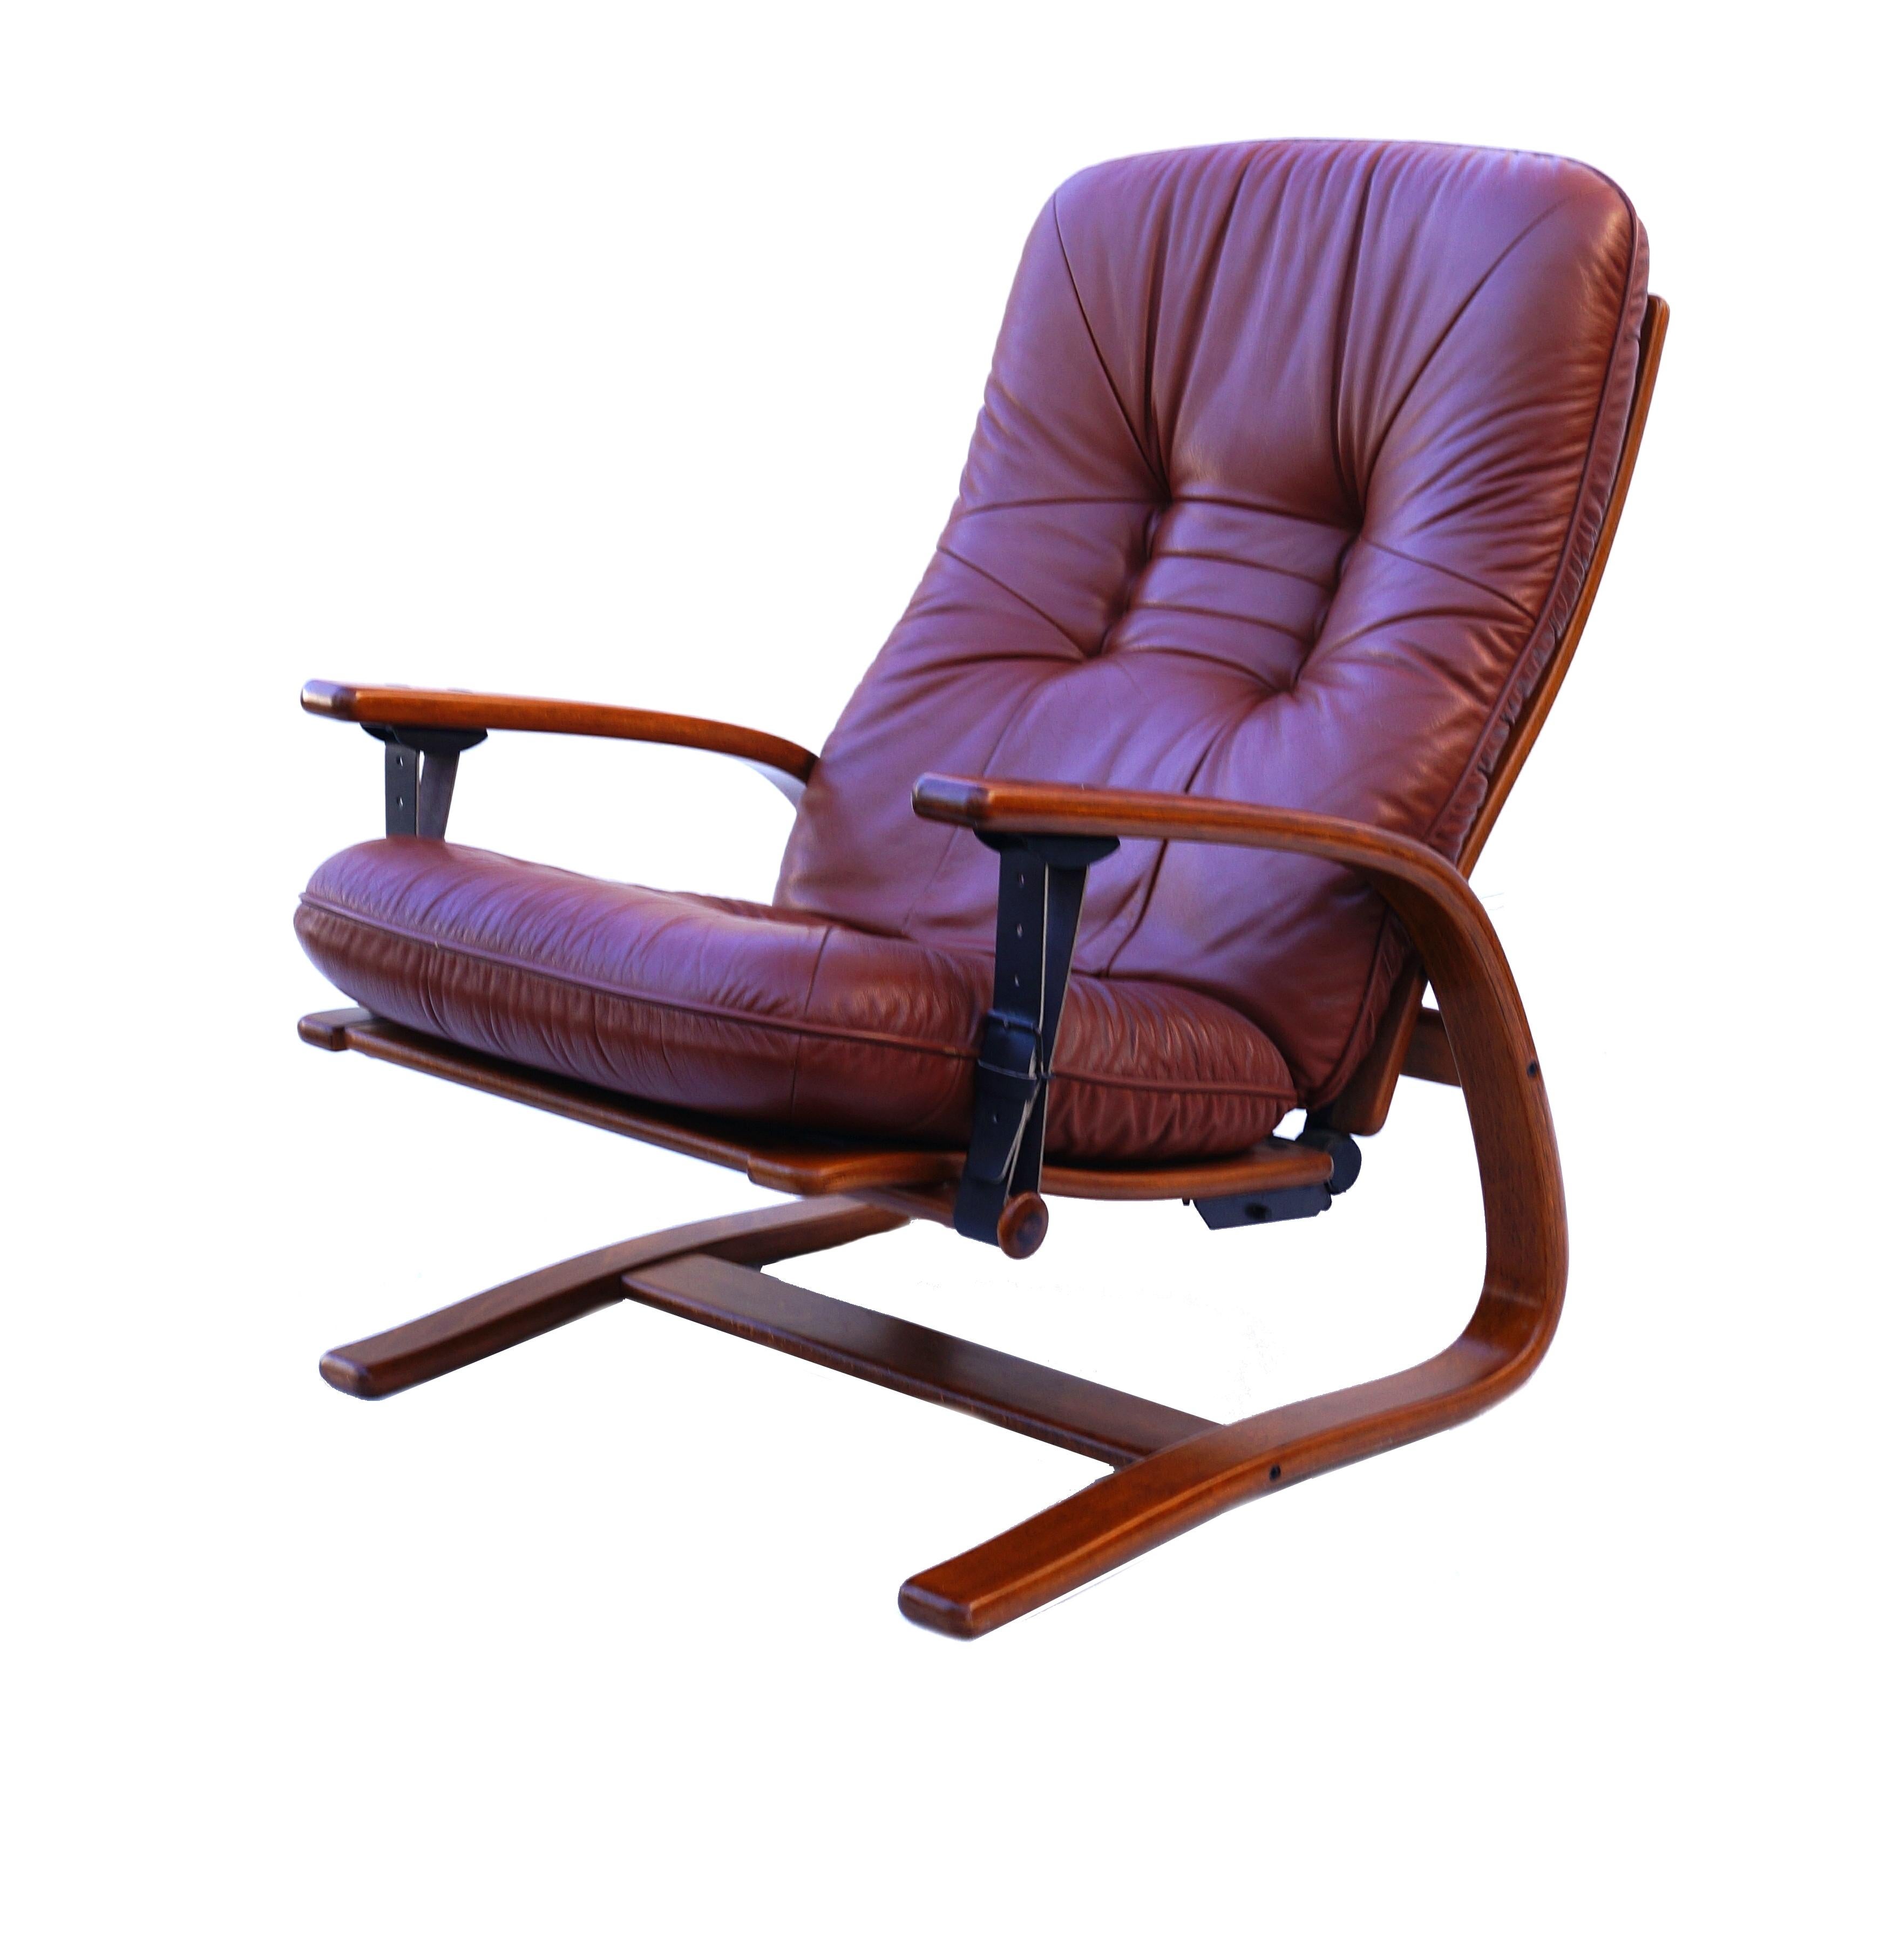 Norwegian Midcentury Westnofa Leather Reclining Lounge Chair and Ottoman Ingmar Relling